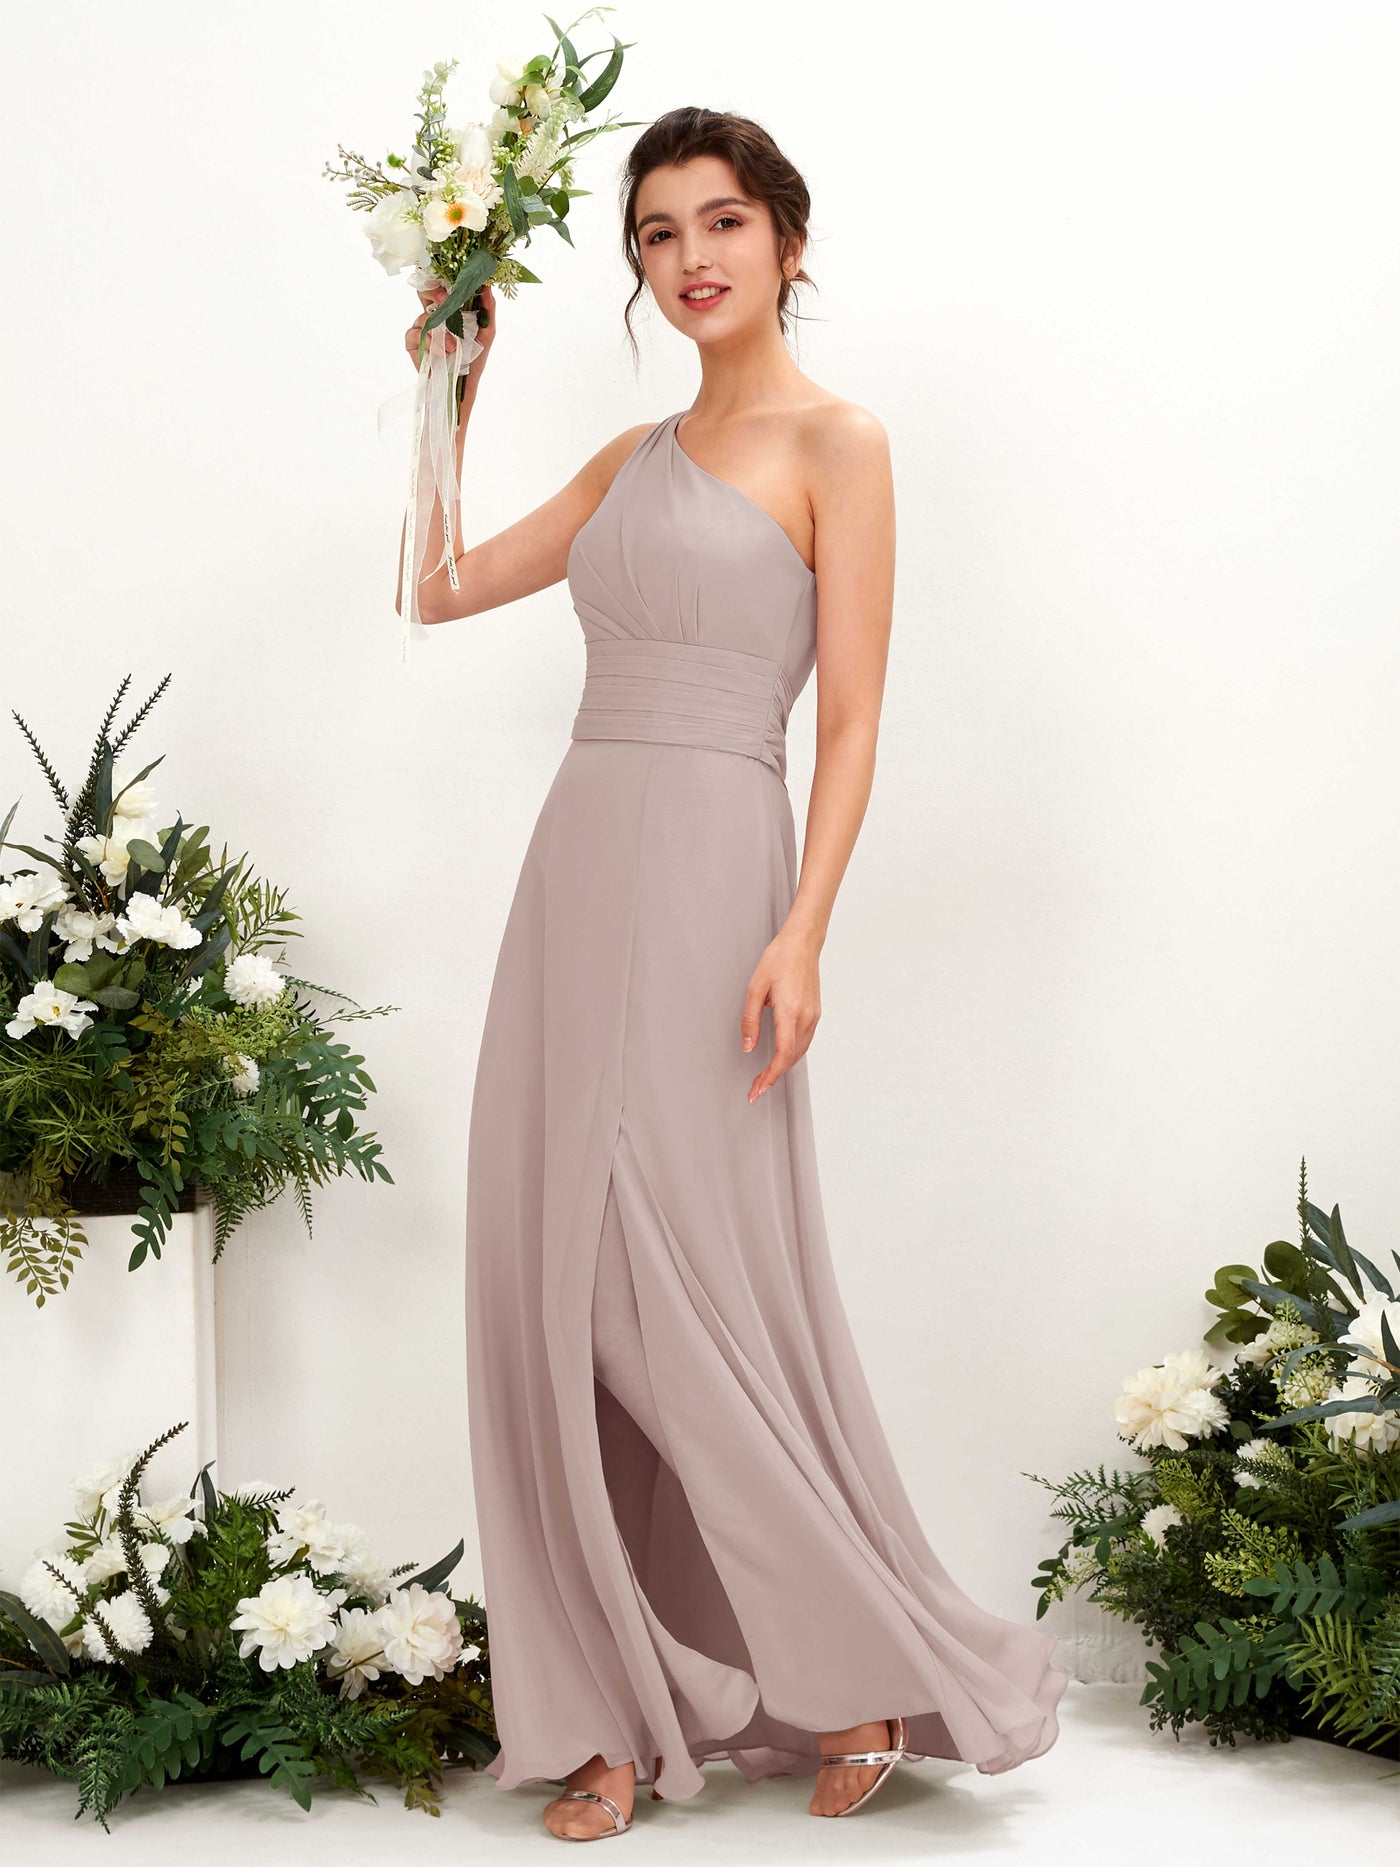 Taupe Bridesmaid Dresses Bridesmaid Dress A-line Chiffon One Shoulder Full Length Sleeveless Wedding Party Dress (81224724)#color_taupe